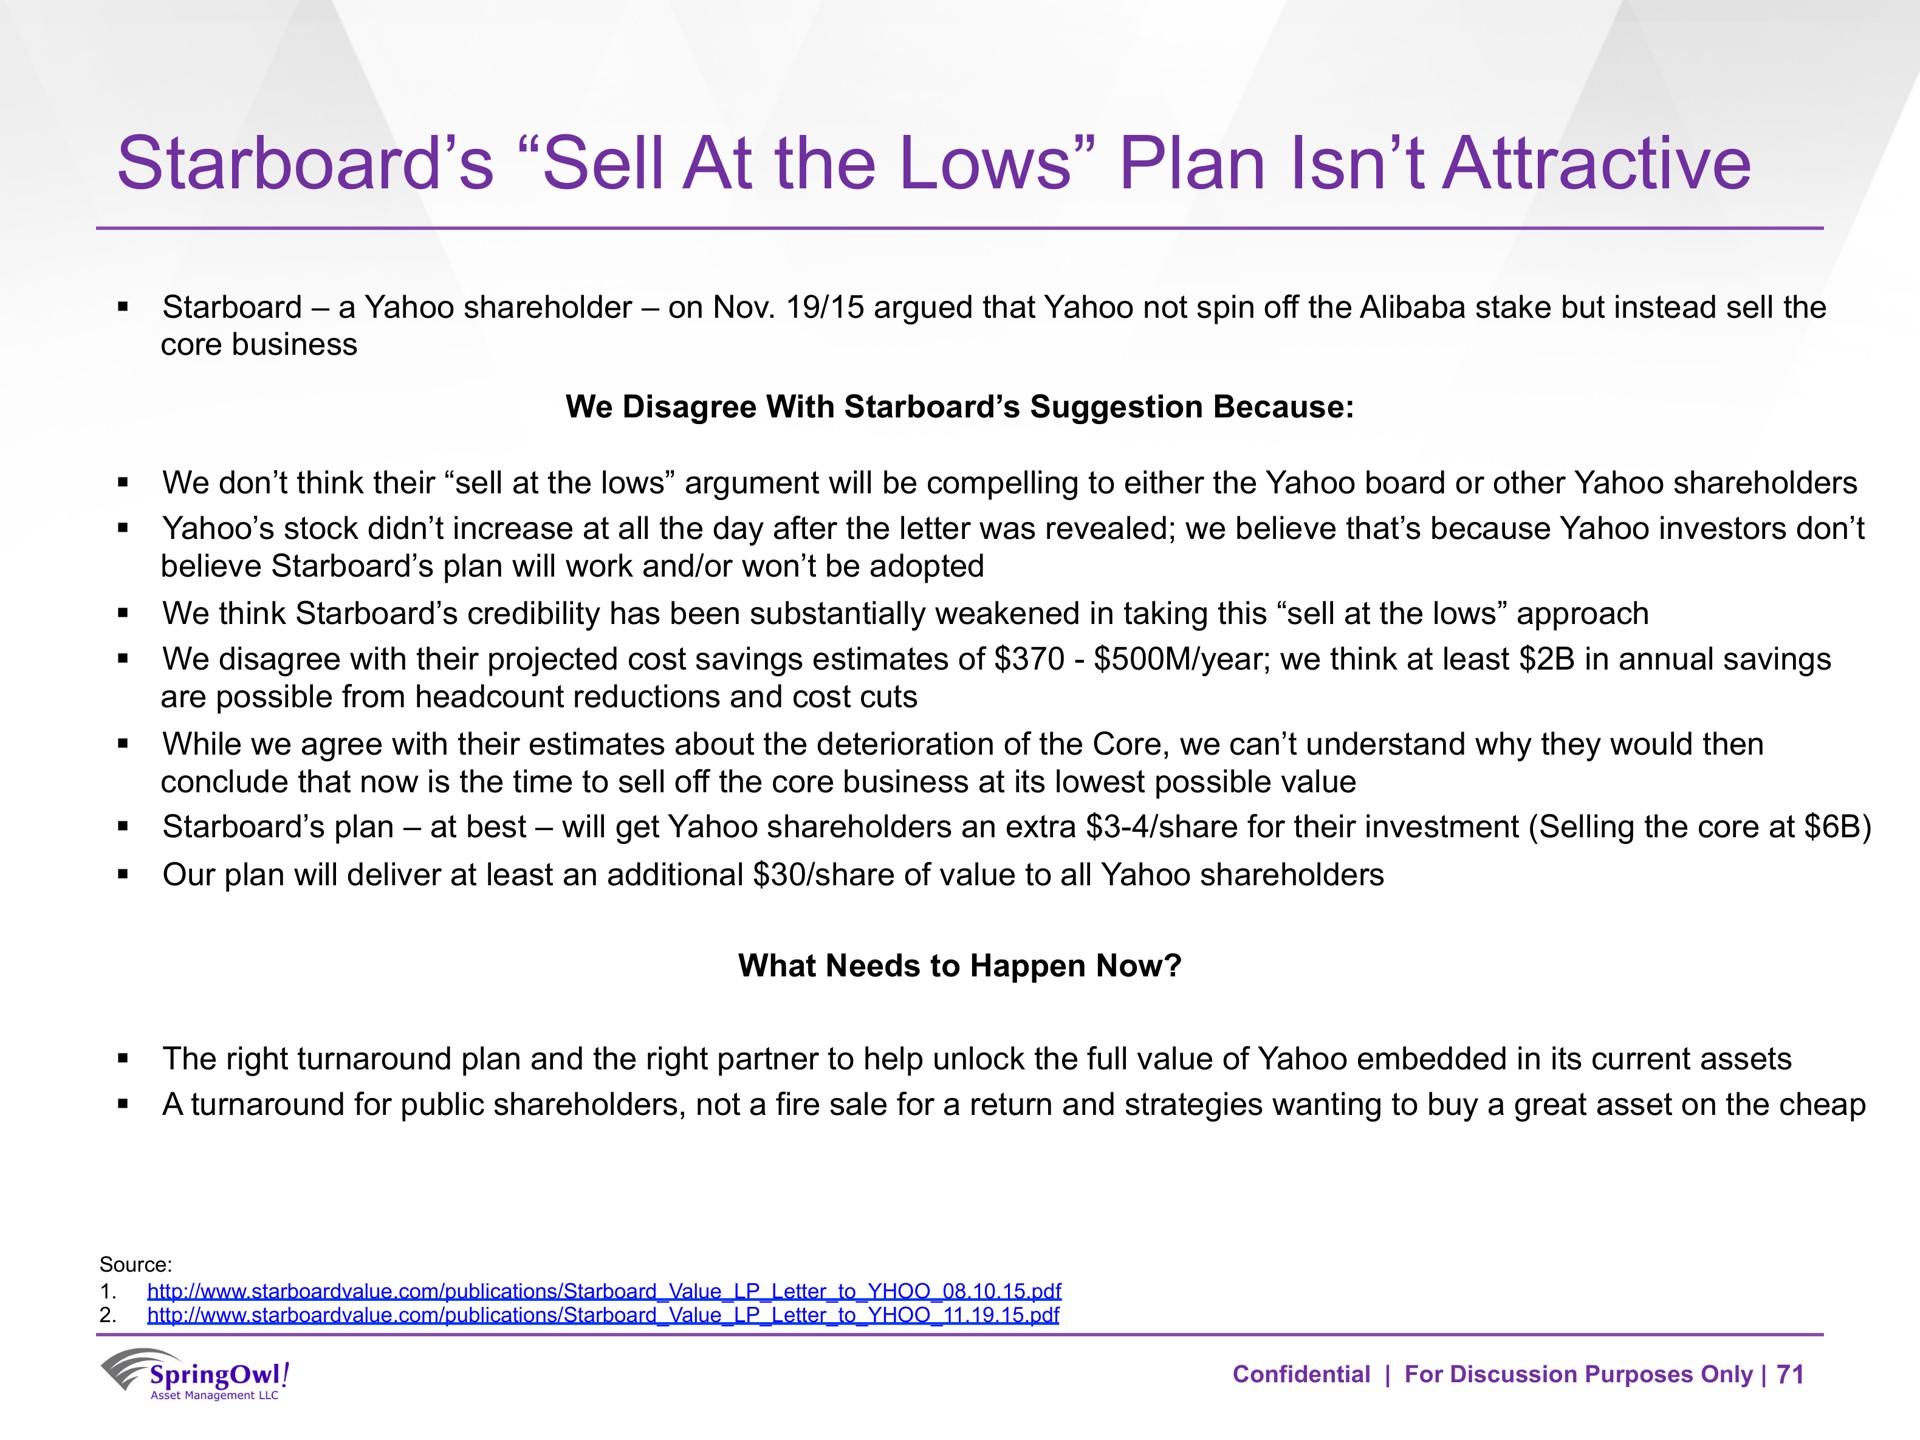 starboard sell at the lows plan attractive | SpringOwl